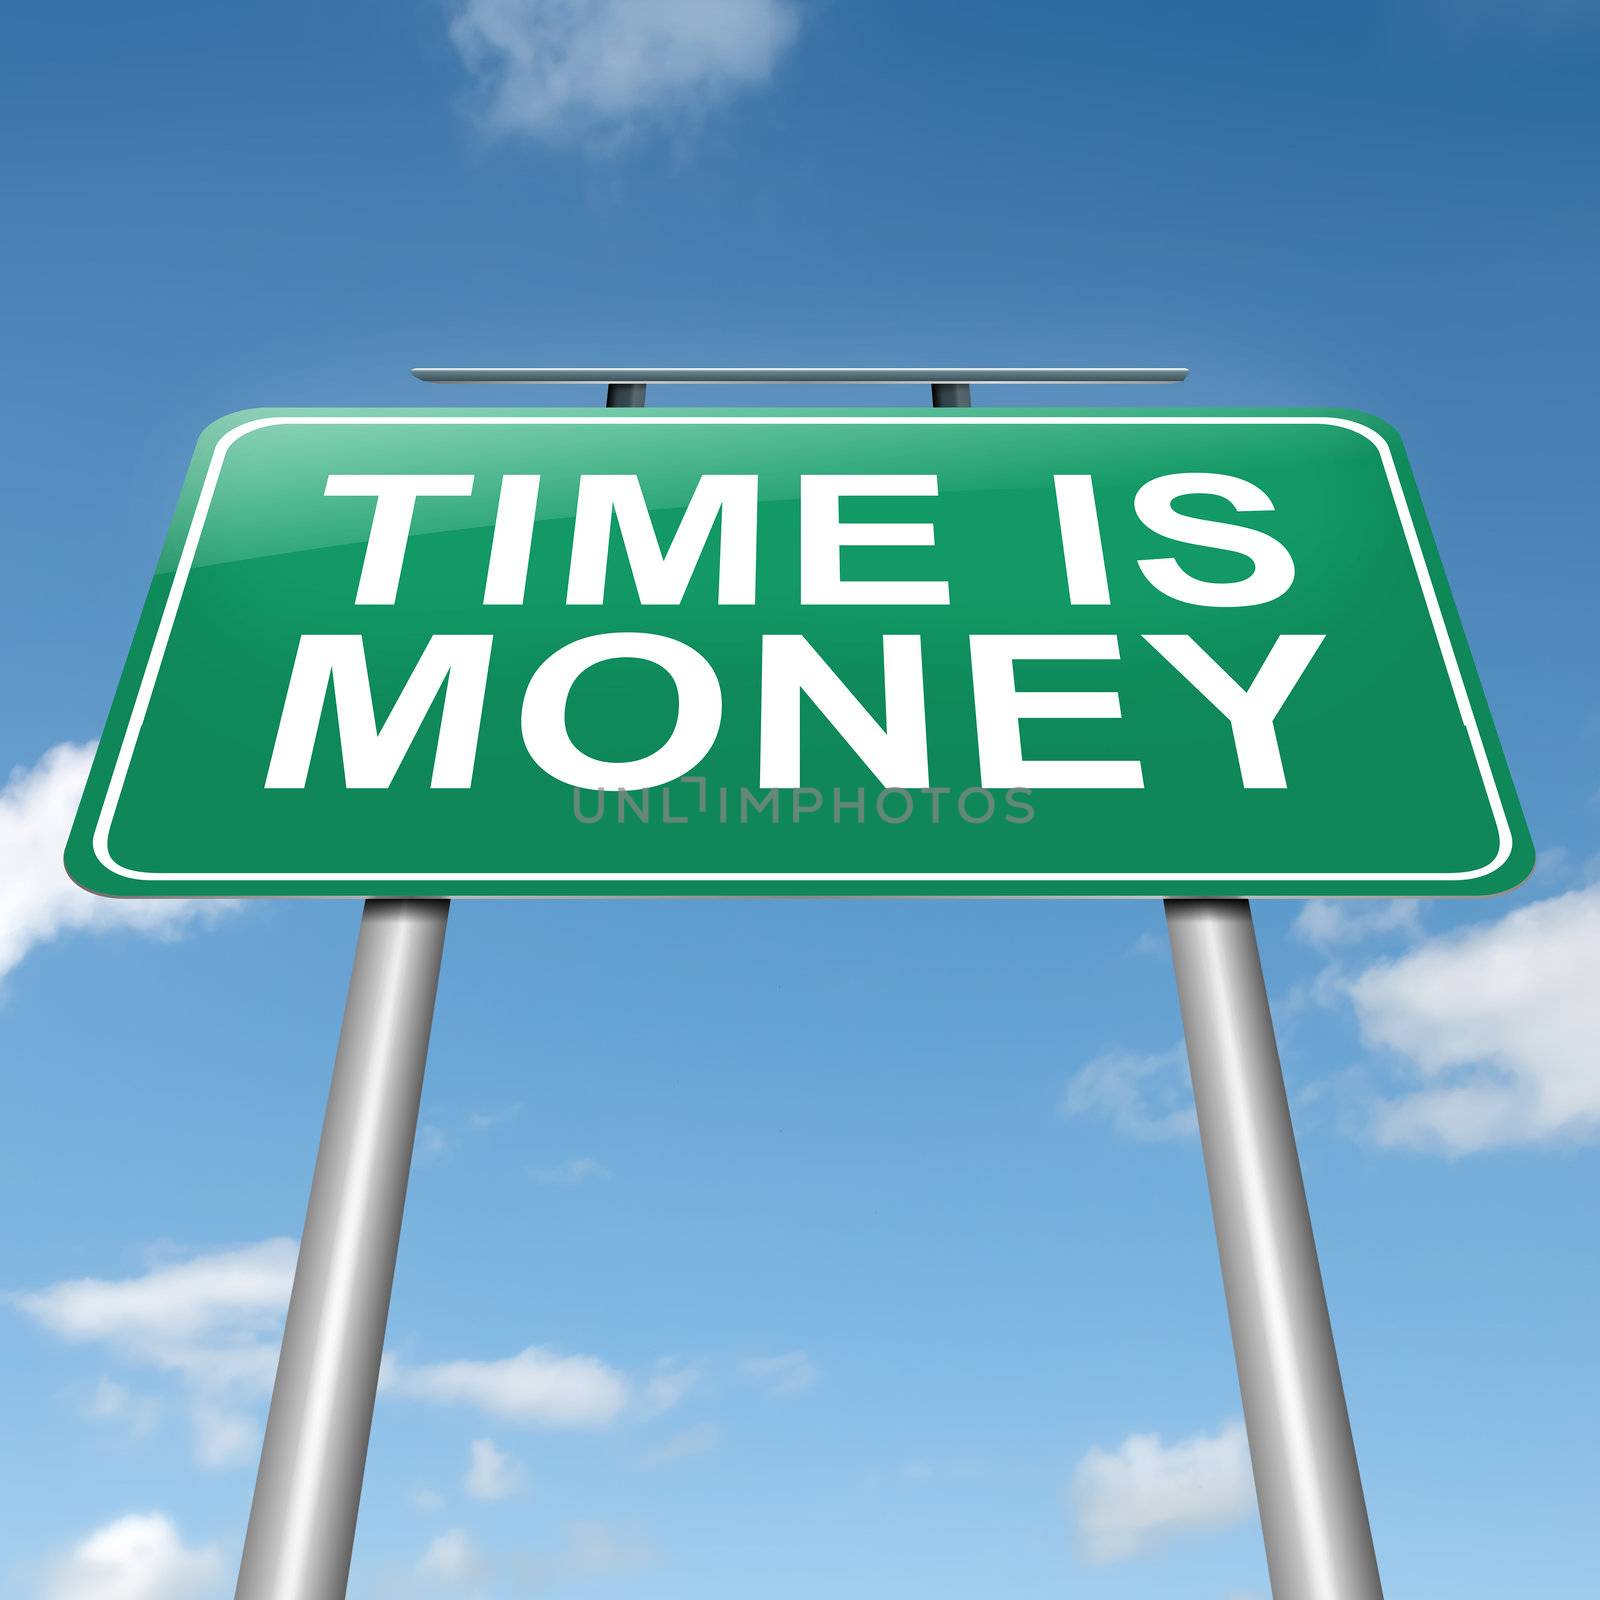 Illustration depicting a roadsign with a time is money concept. Sky background.